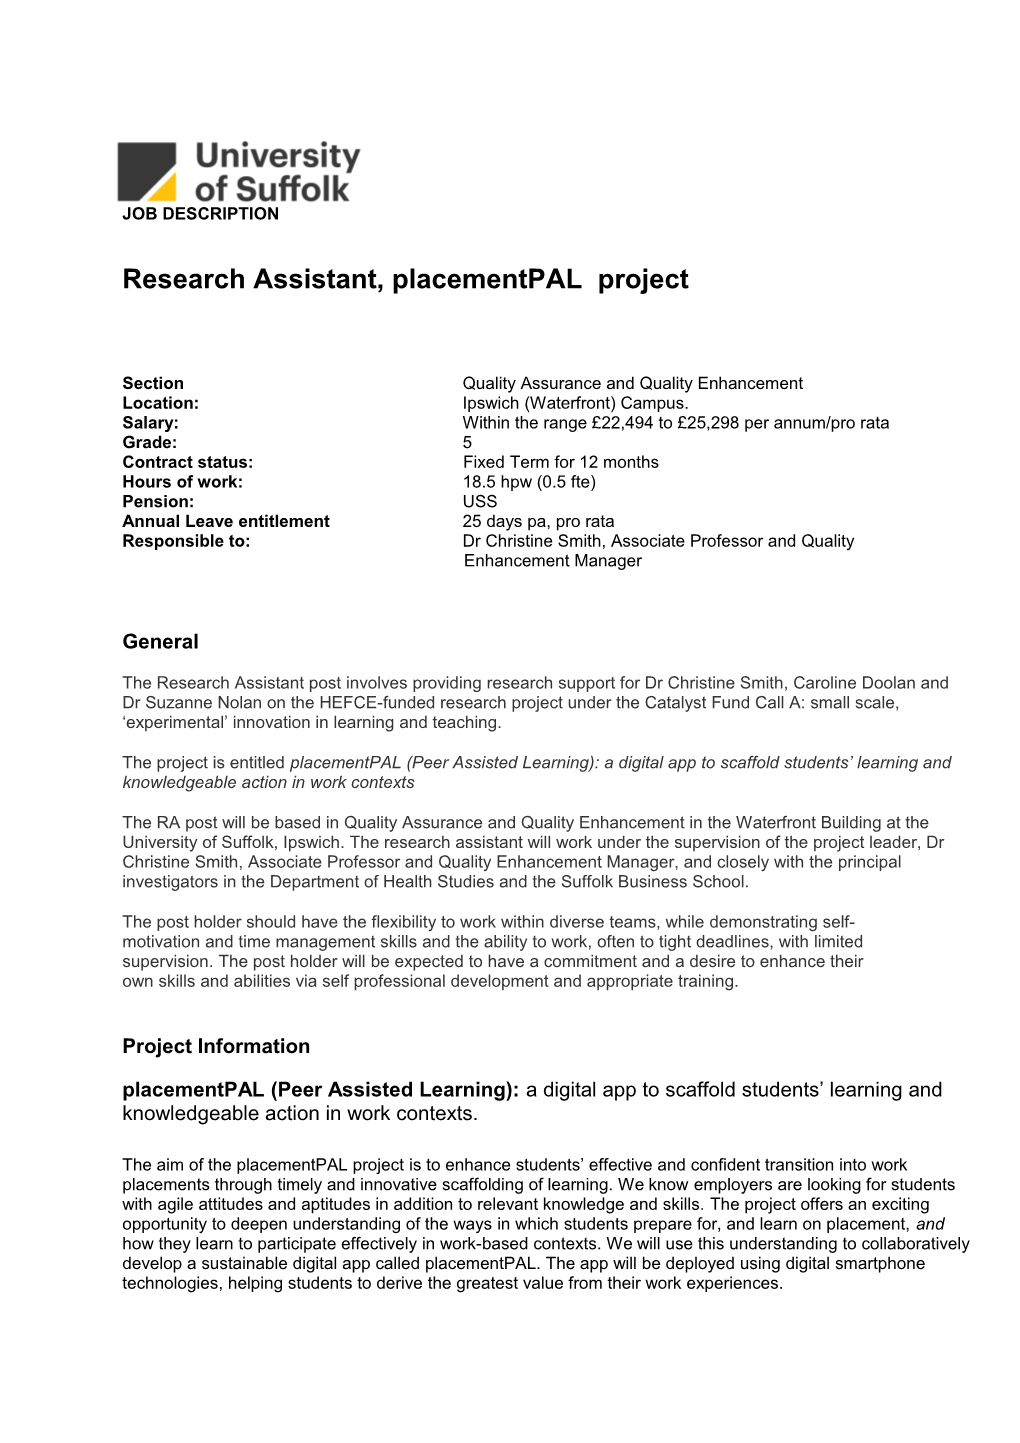 Research Assistant, Placementpal Project